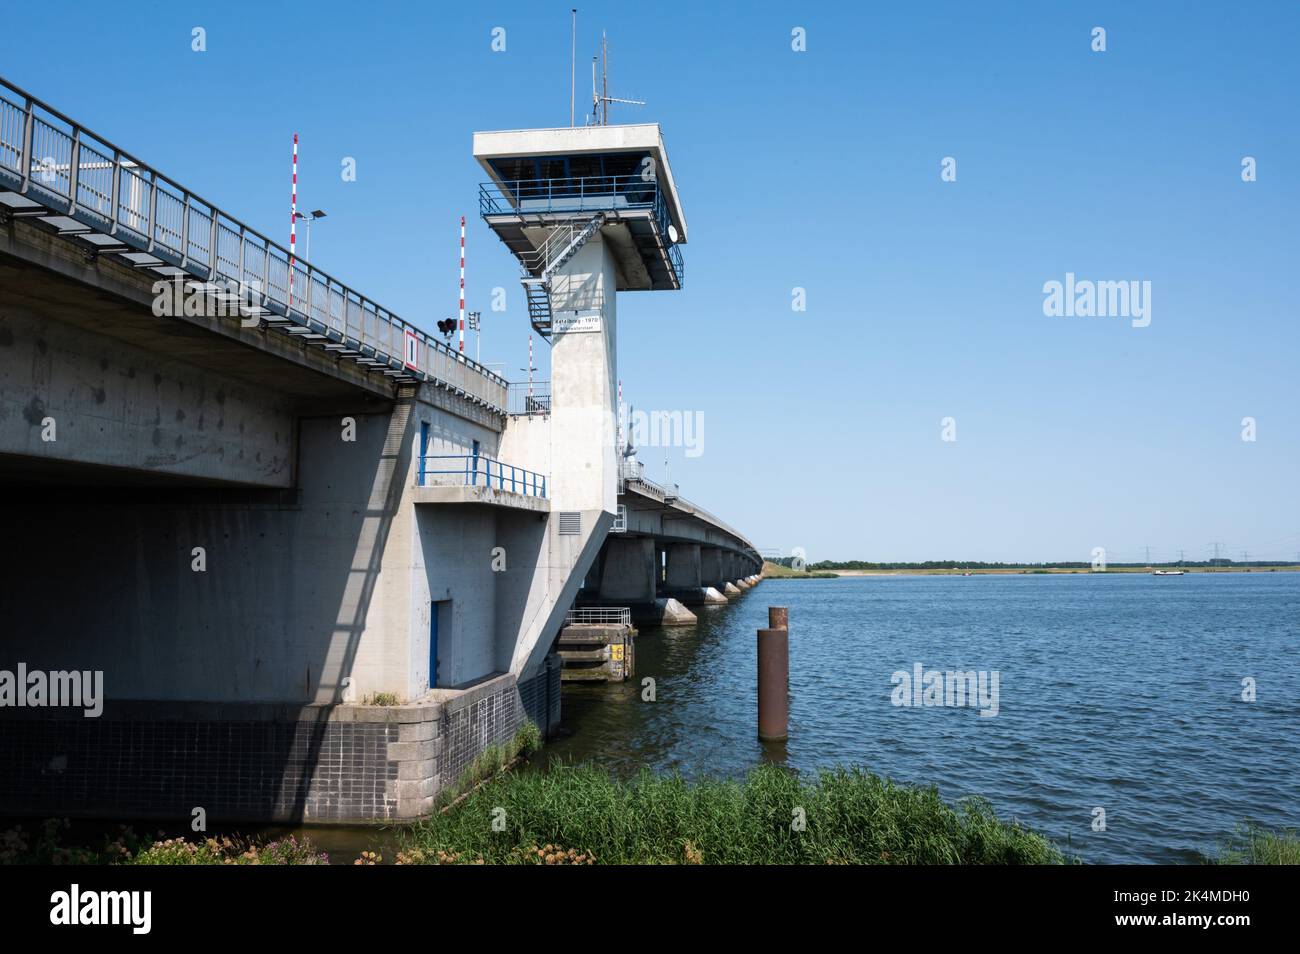 Nagele, Flevoland, The Netherlands - View over the Ketel bridge with the A6 freeway. Stock Photo